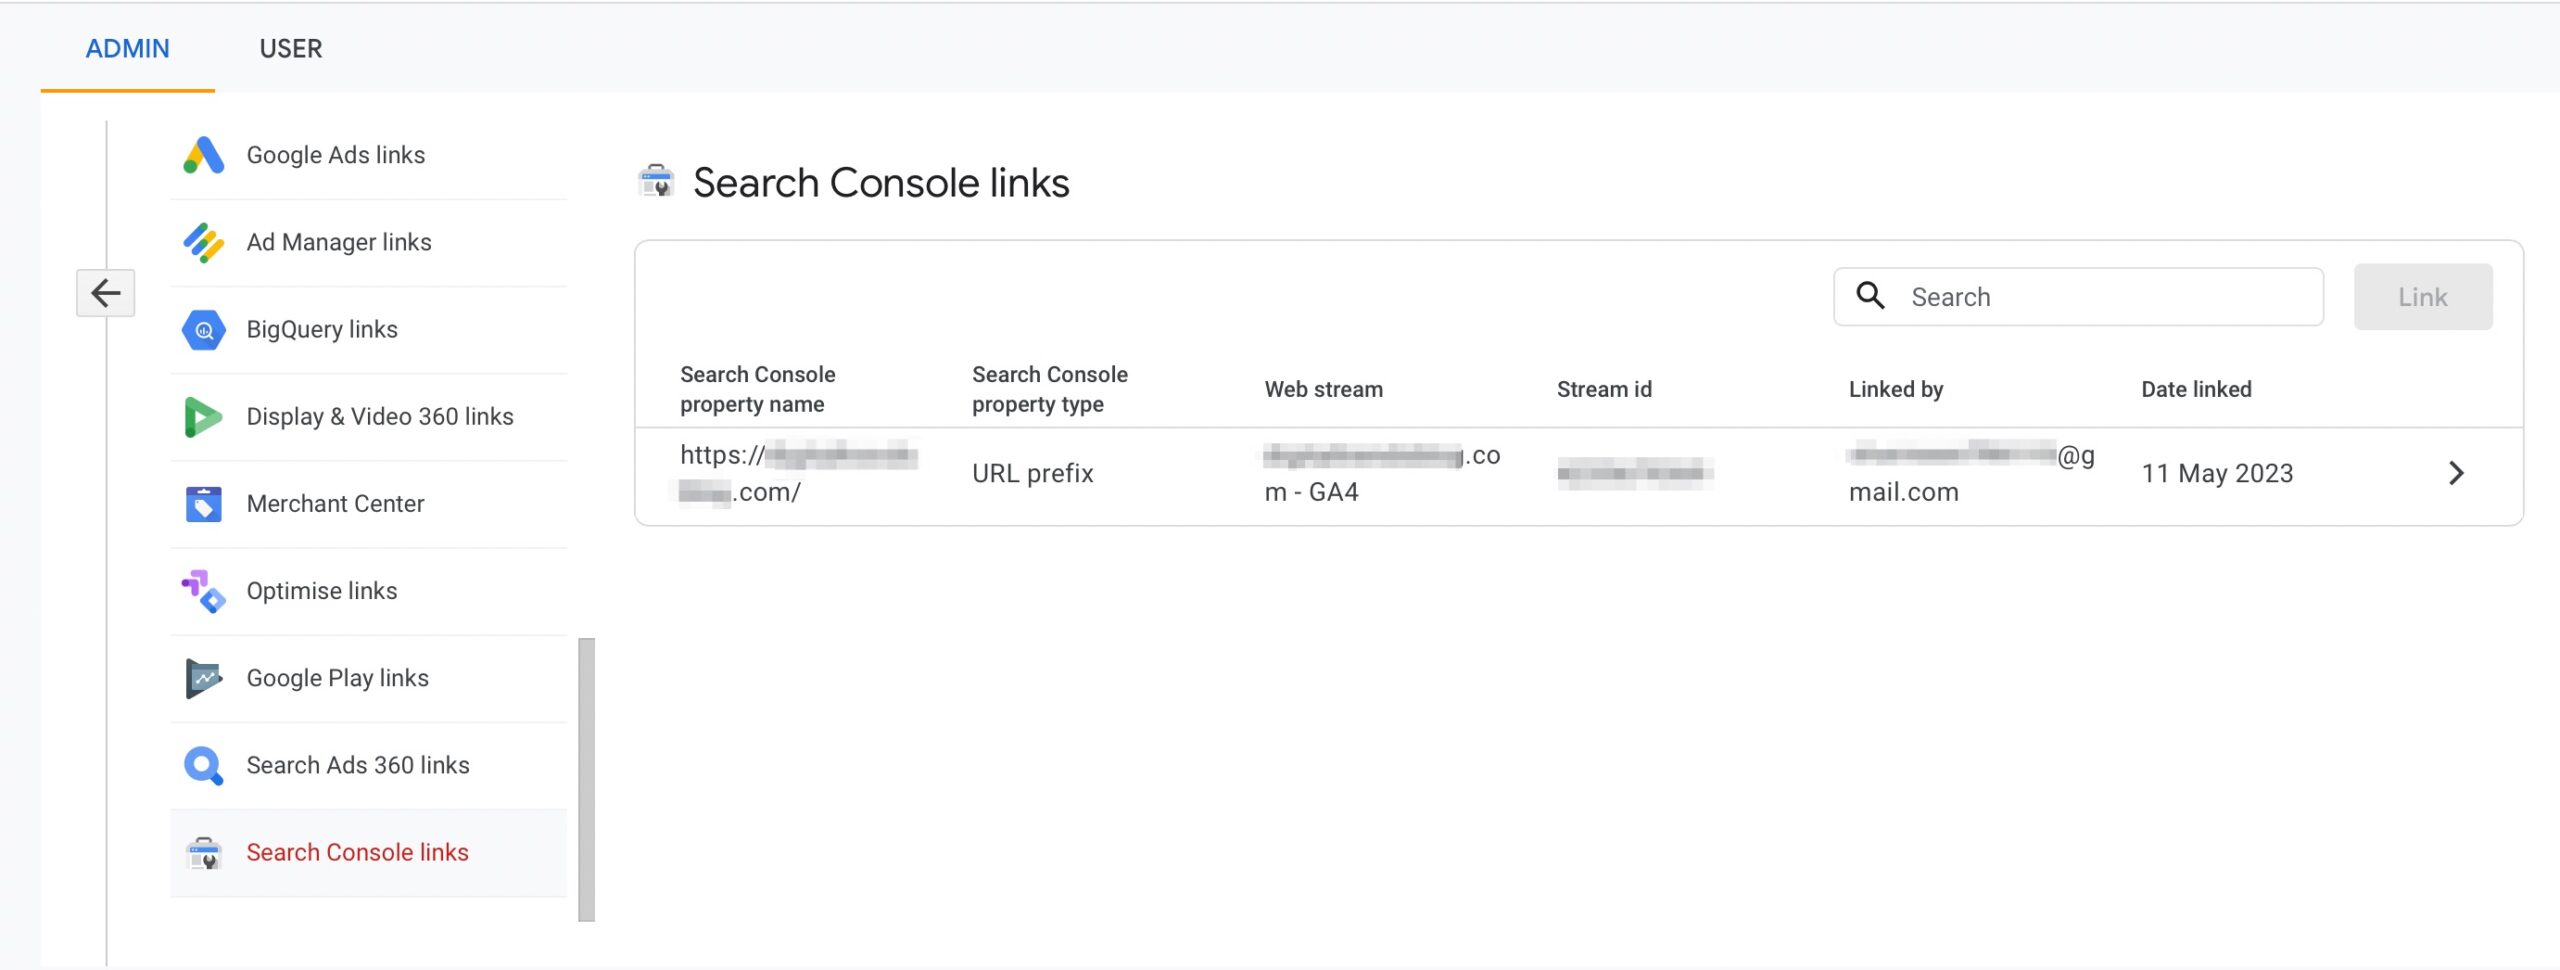 Search Console link created